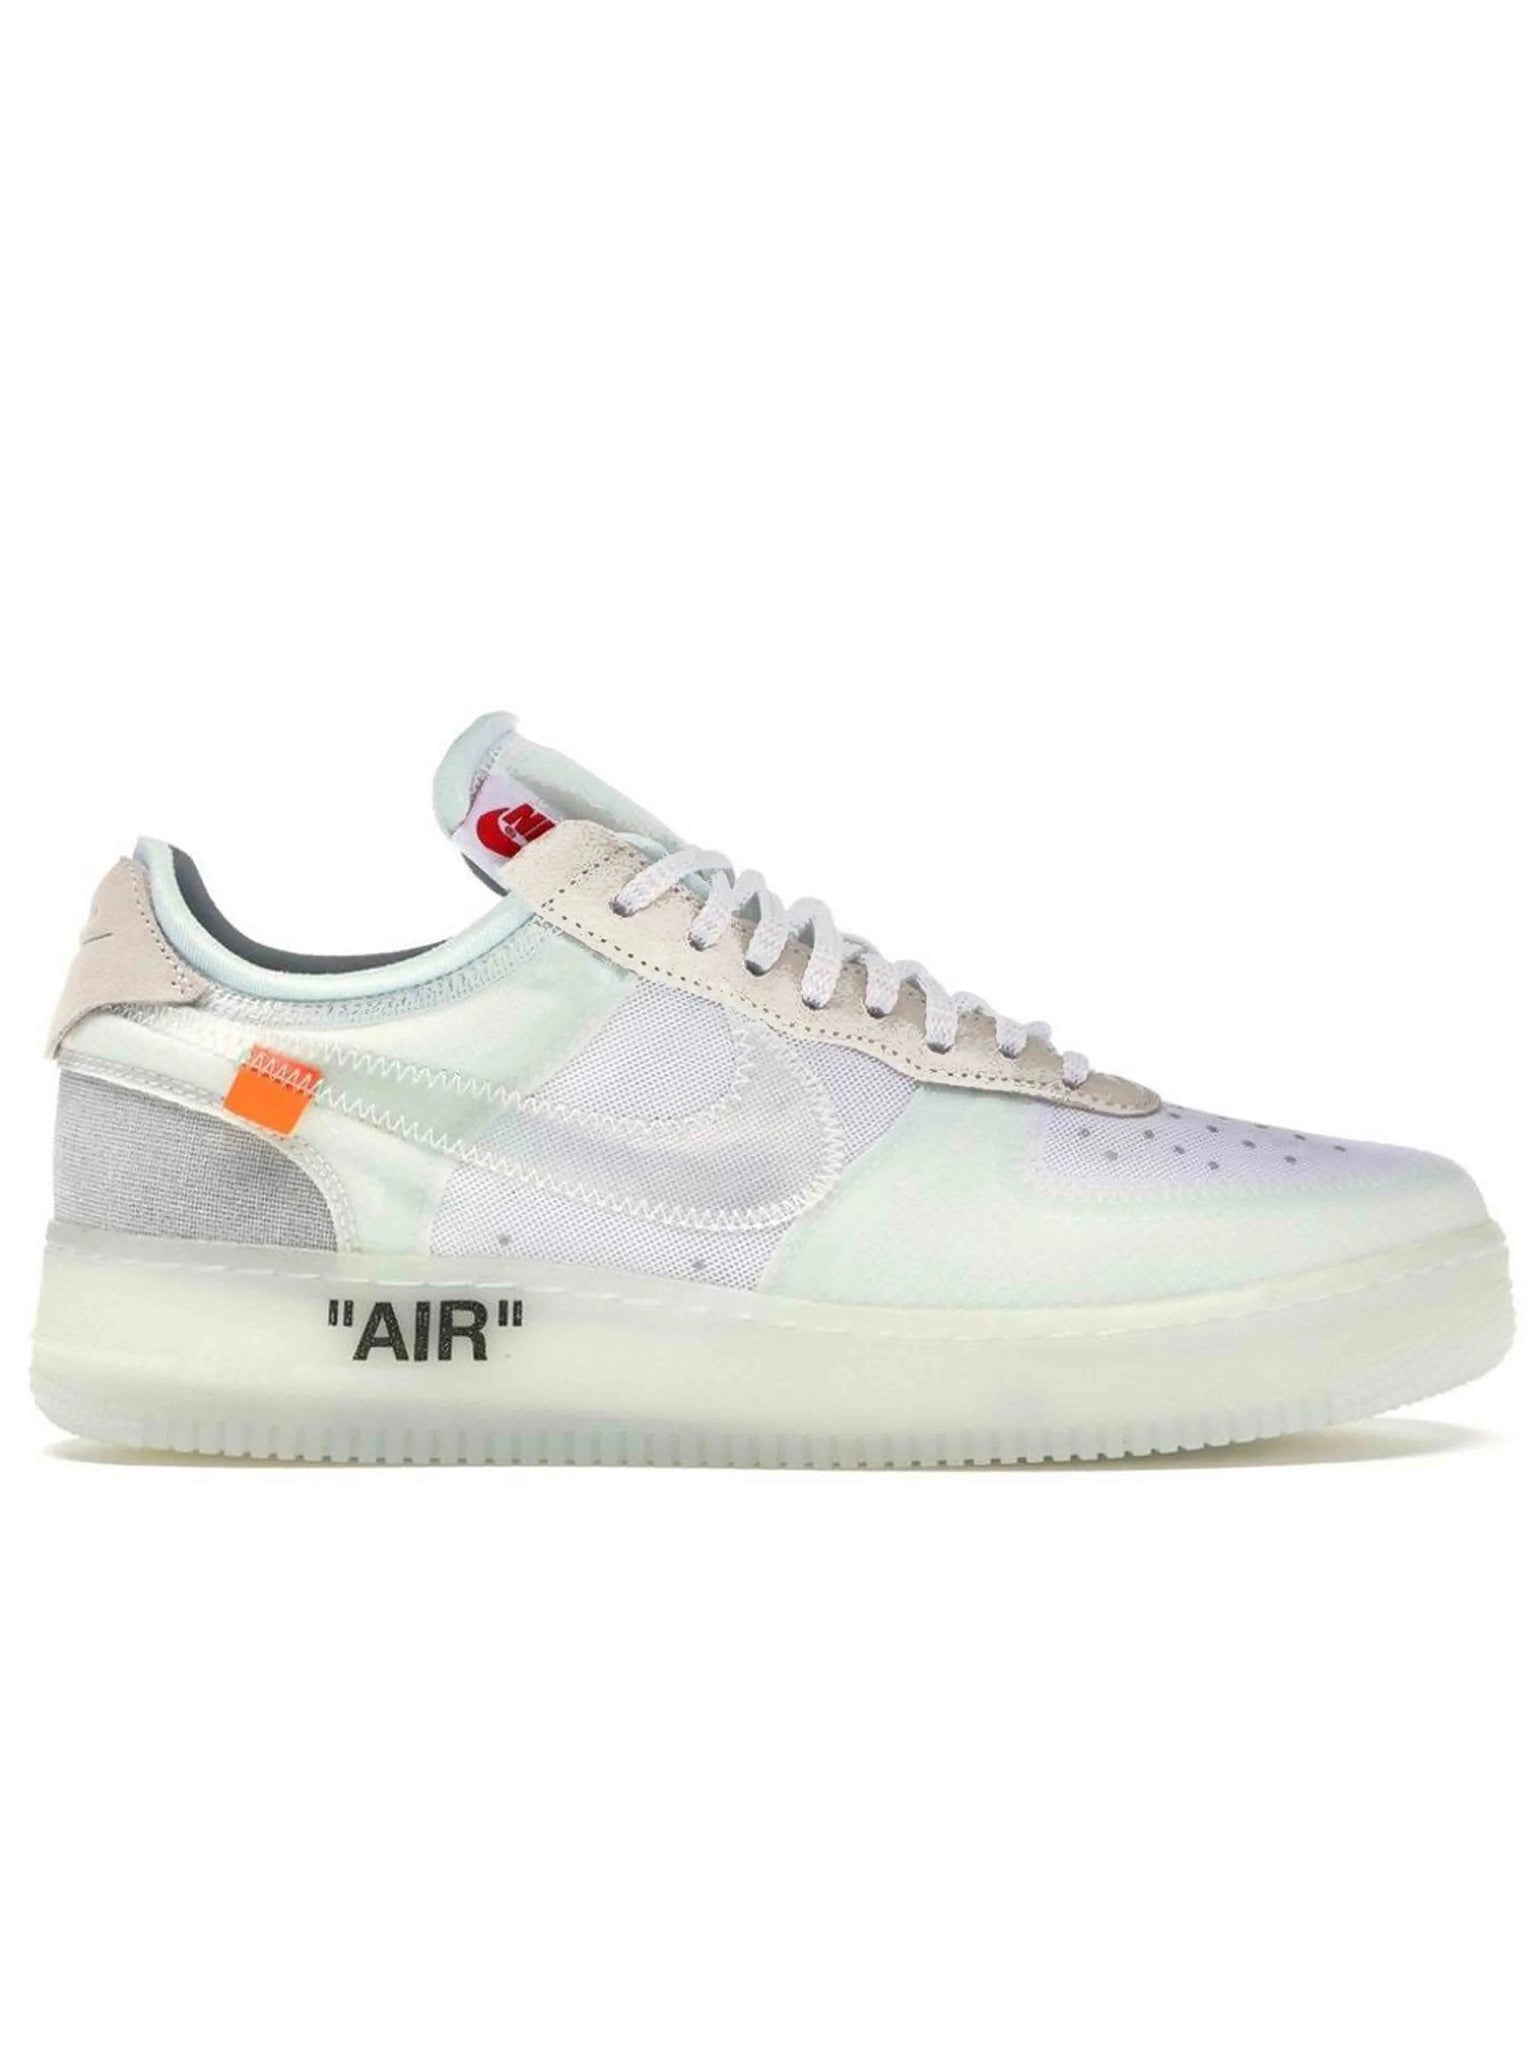 Nike X Off-White Air Force 1 The Ten [2017] Prior